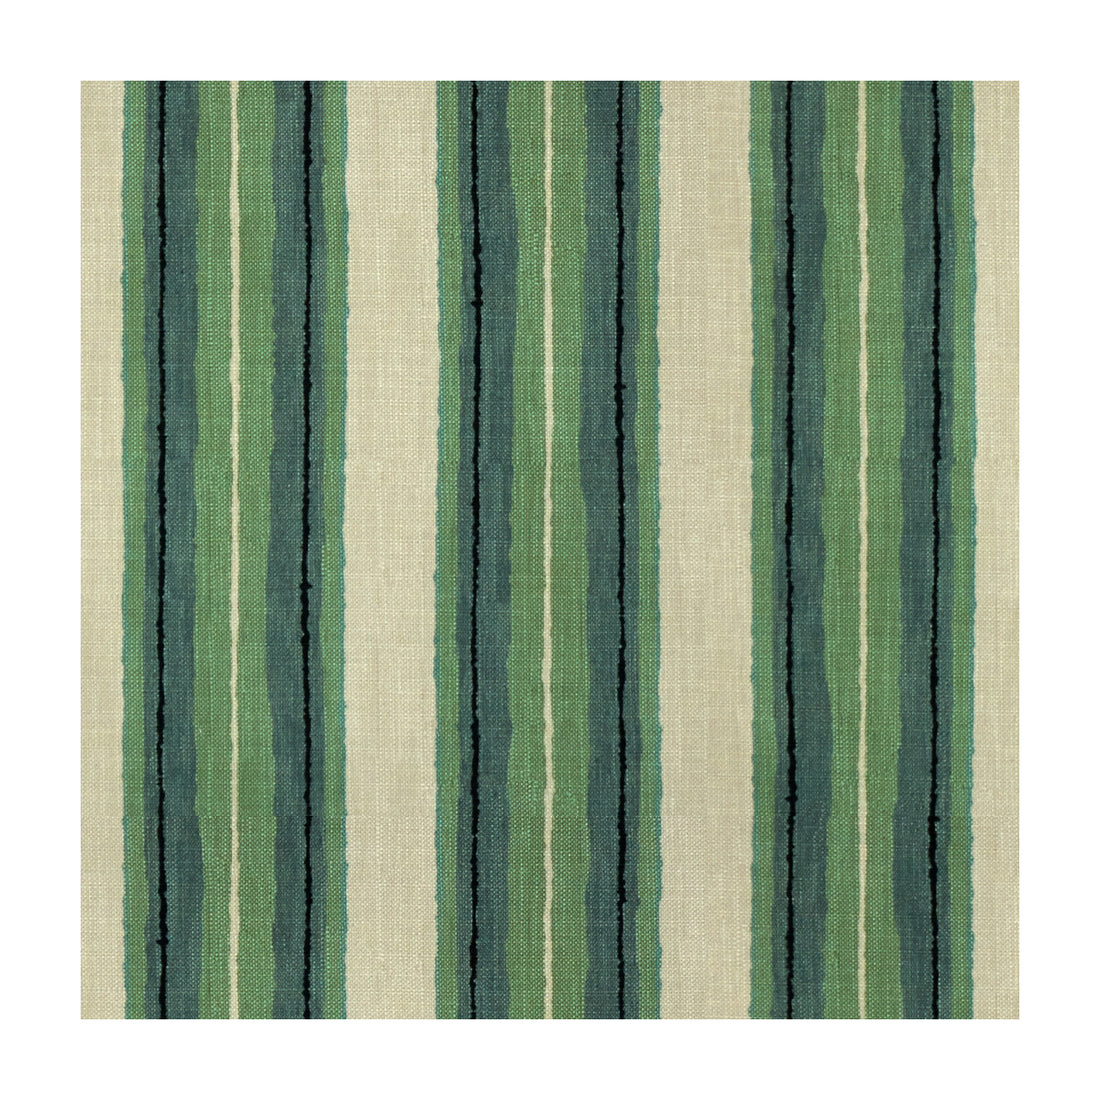 Shoreline fabric in evergreen color - pattern GWF-3426.330.0 - by Lee Jofa Modern in the Kelly Wearstler Terra Firma Textiles collection